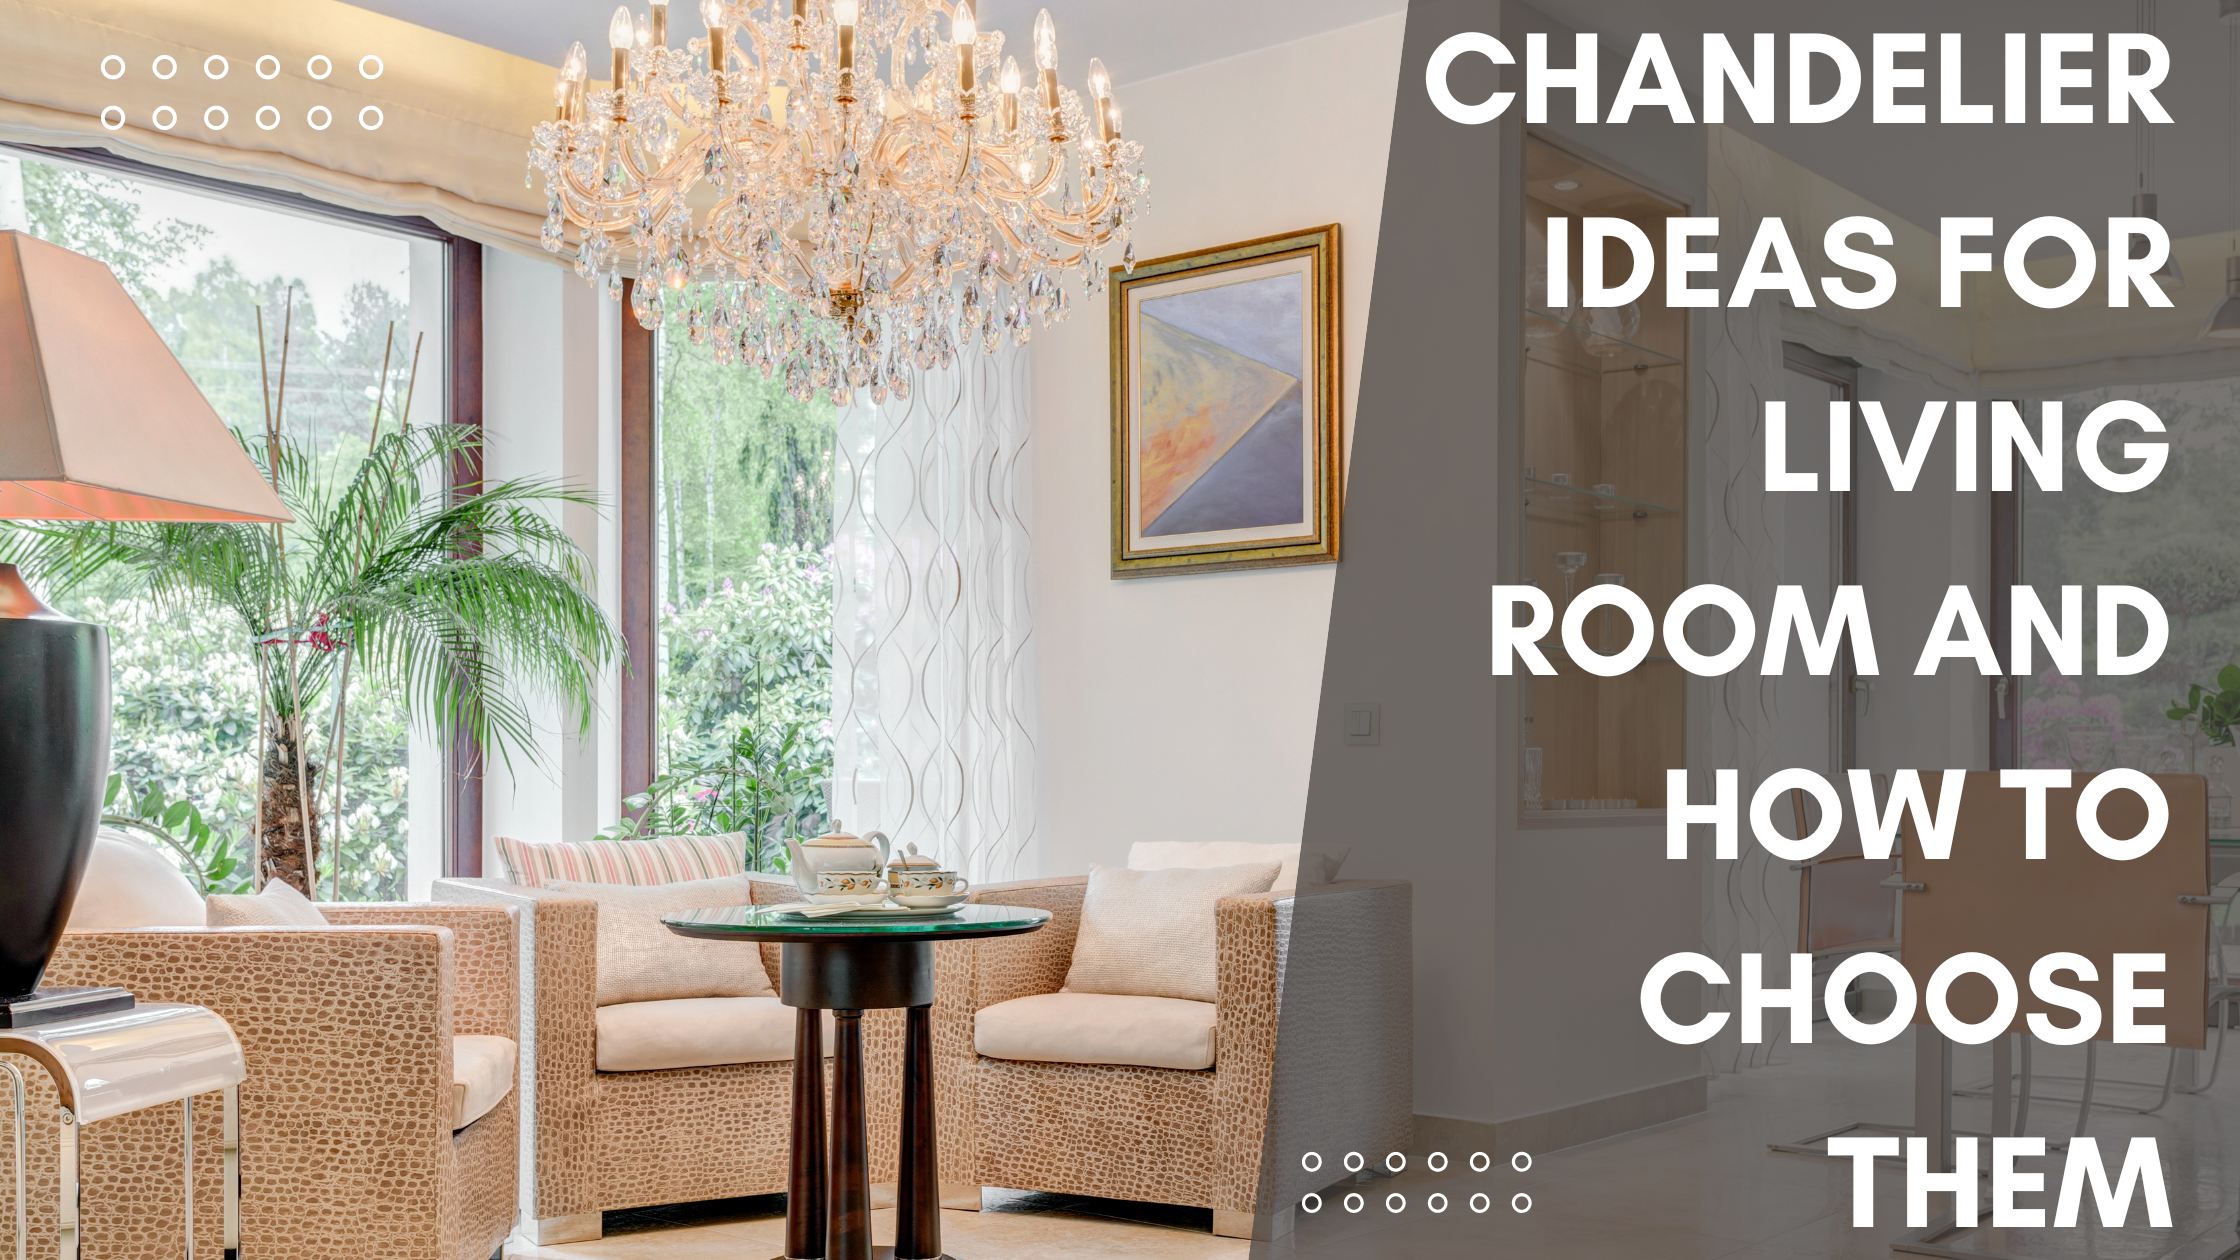 Chandelier Ideas For Living Room and How To Choose Them